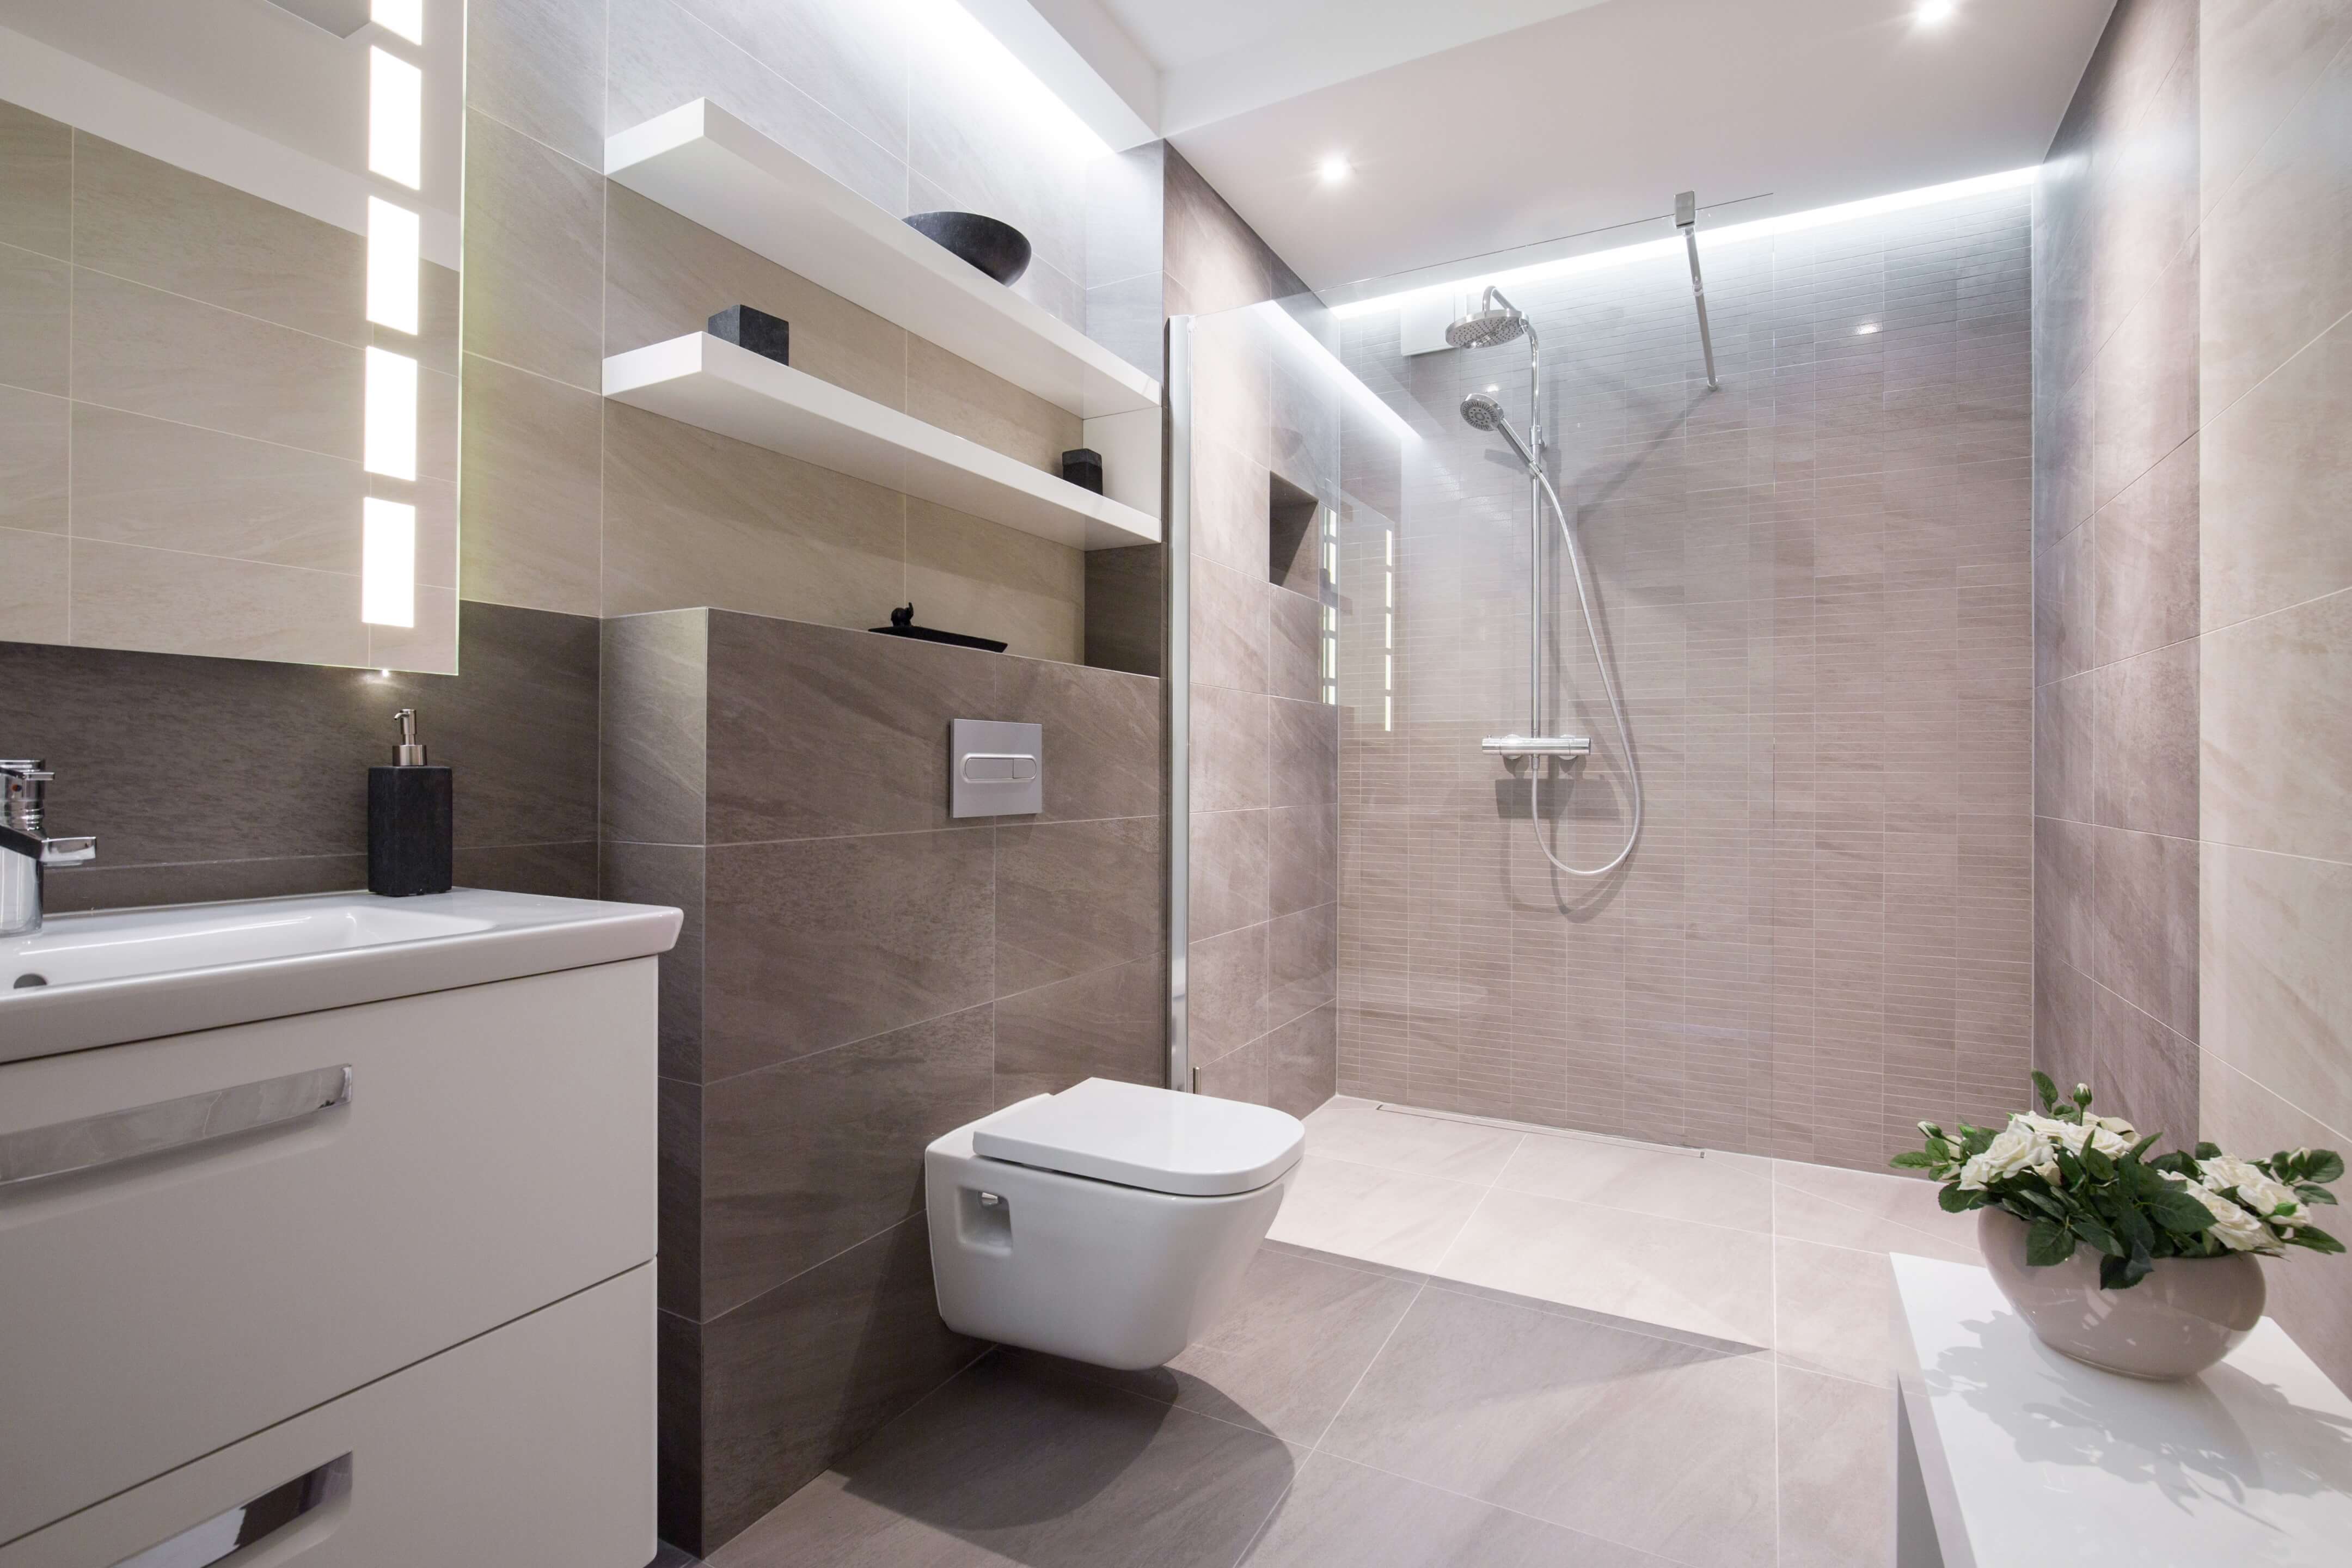 local bathroom fitters camberwell